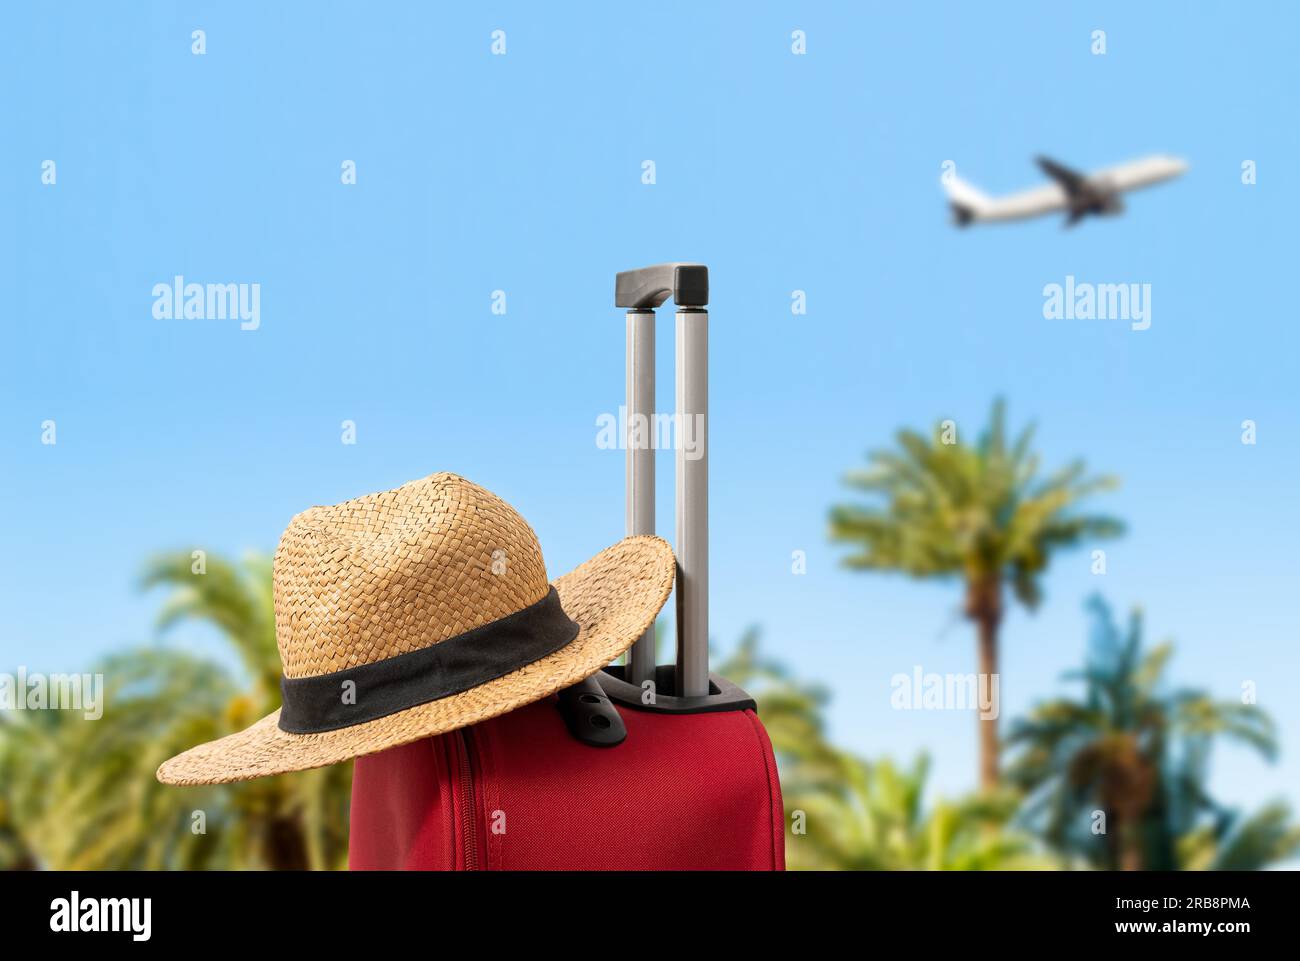 For travel and vacations purposes, a simple modern suitcase in red color at sea with palm trees and hat. Stock Photo